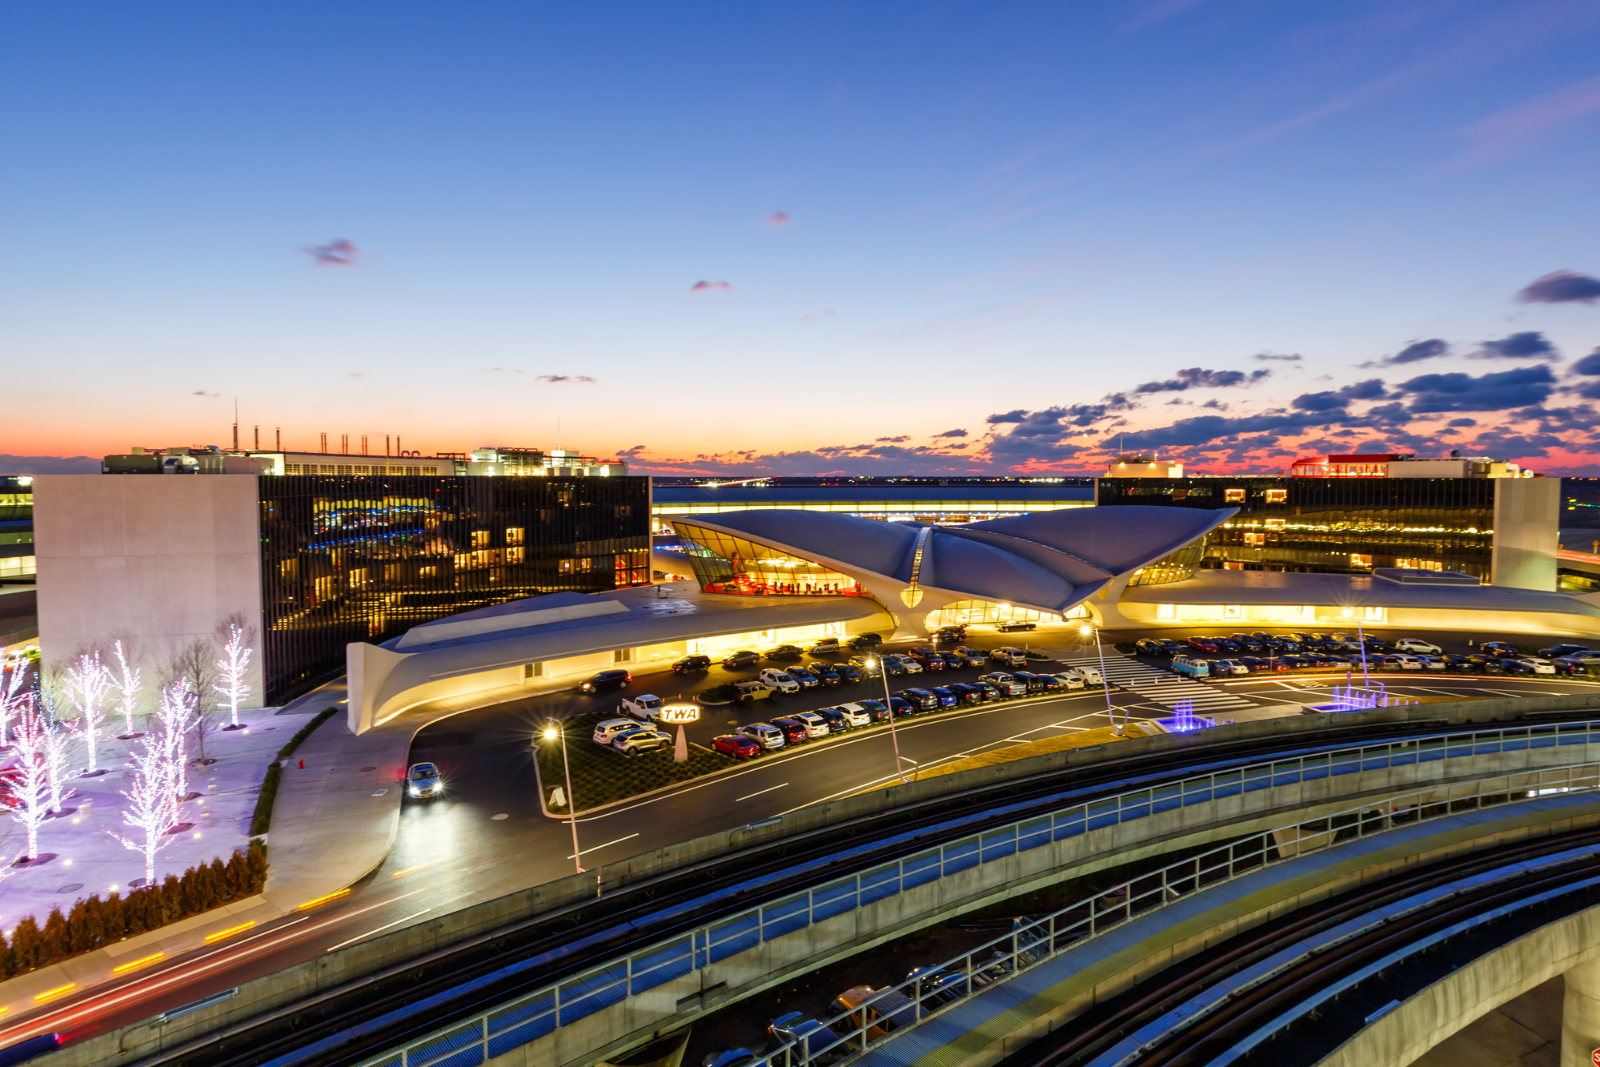 Need an Airport Transfer to/from JFK Airport? Here's What to Expect